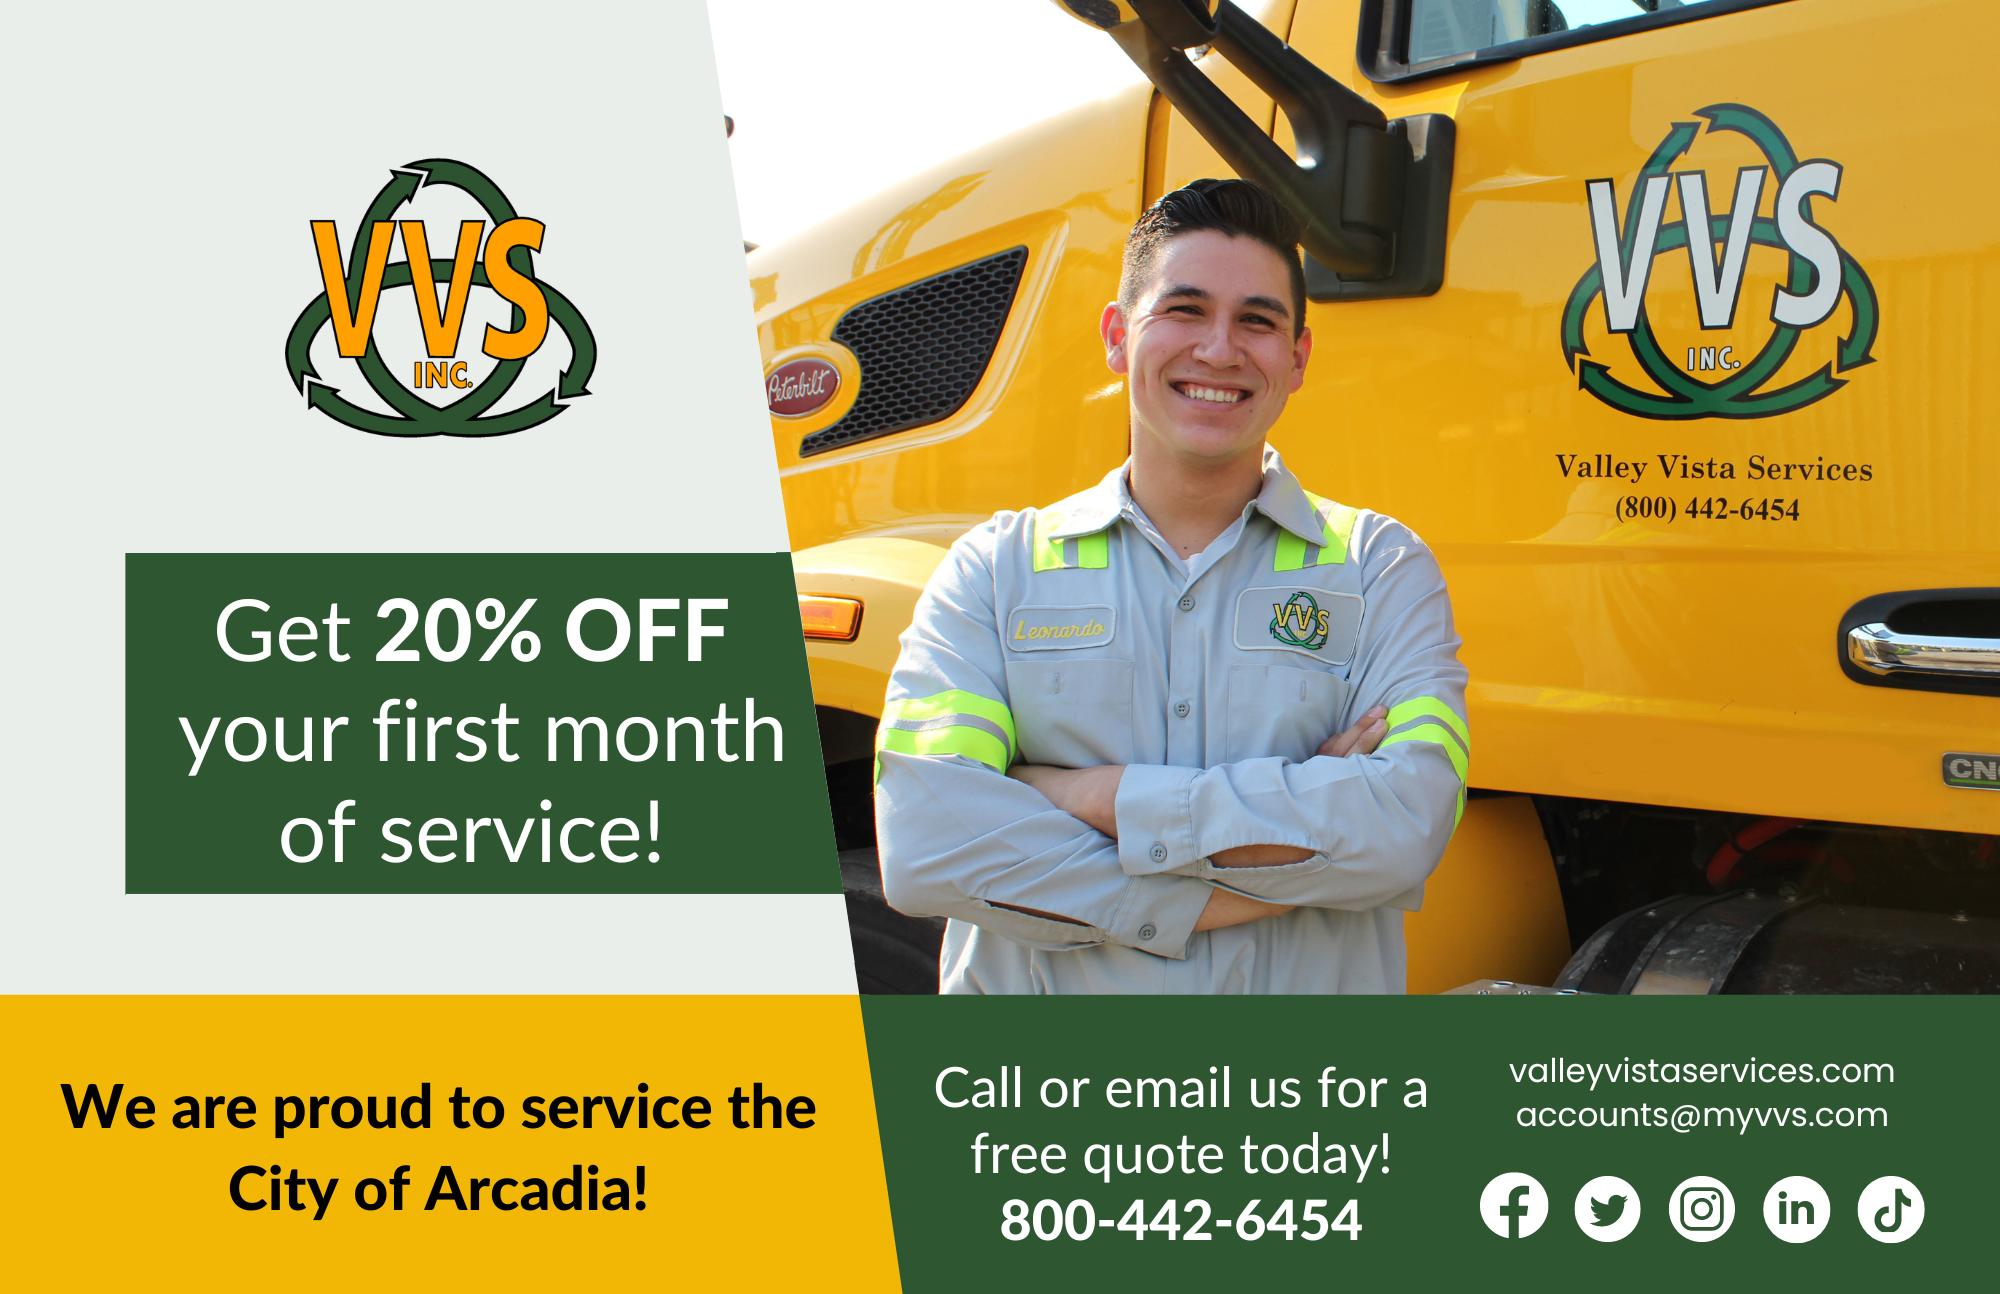 Valley Vista Services attends to City of Arcadia trash needs with discount